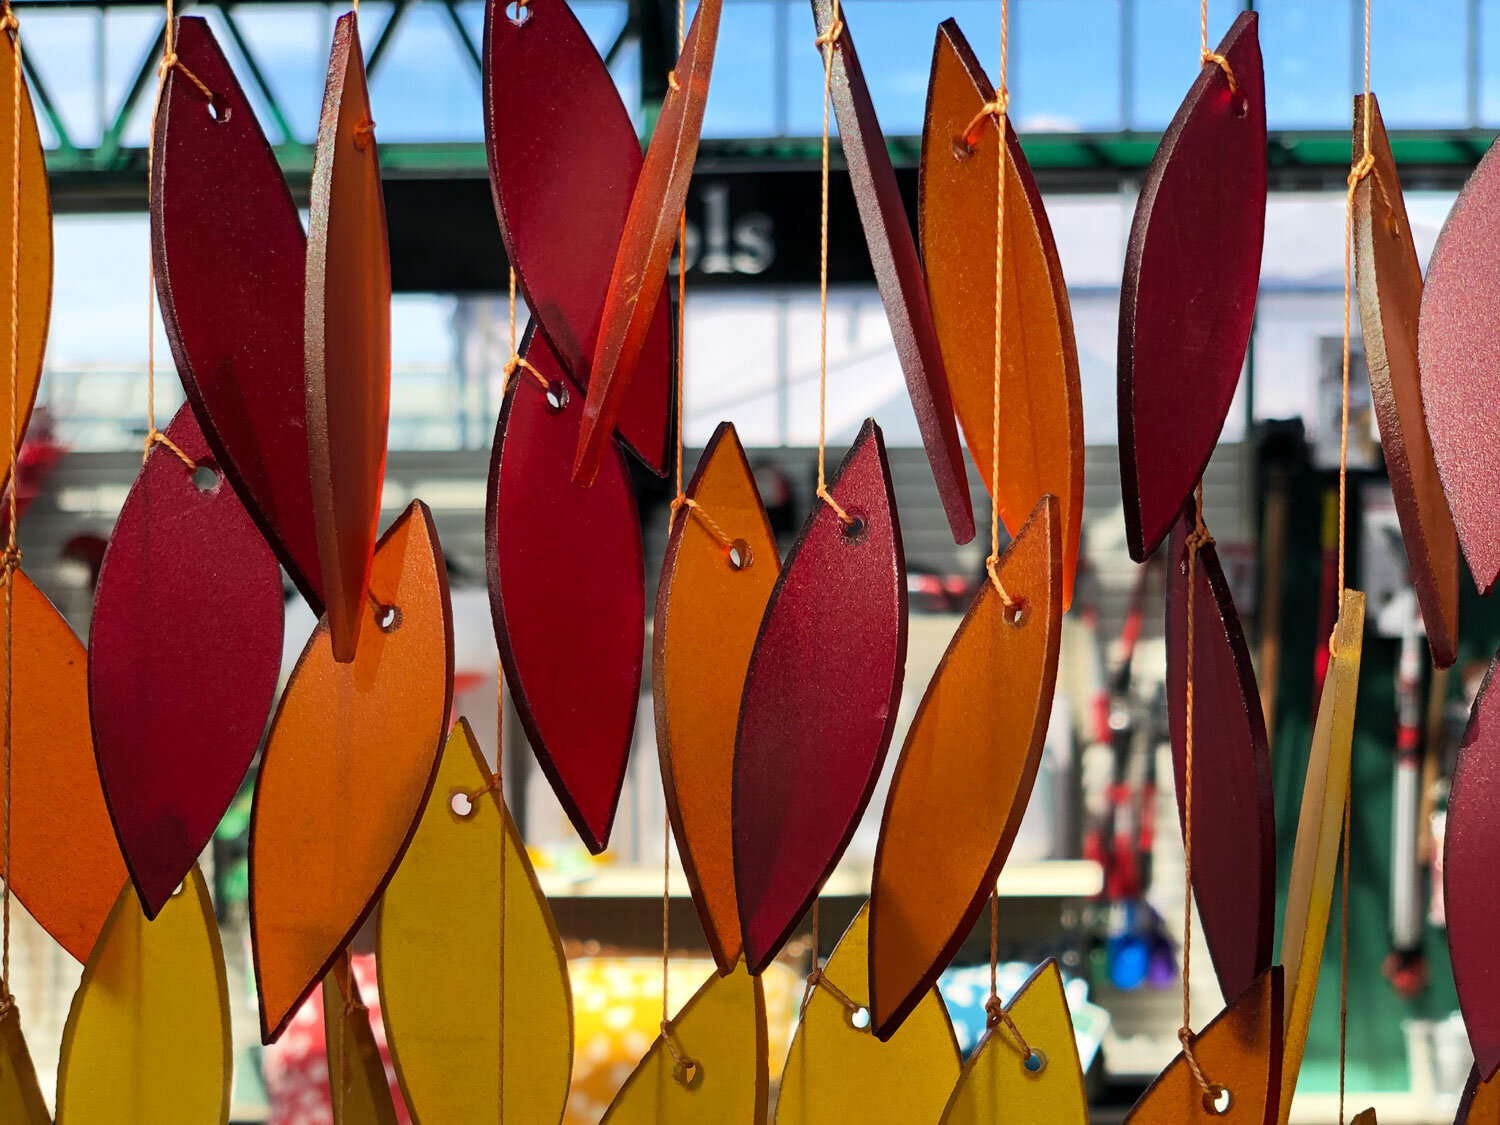 Colorful-Wooden-Wind-Chimes.jpg